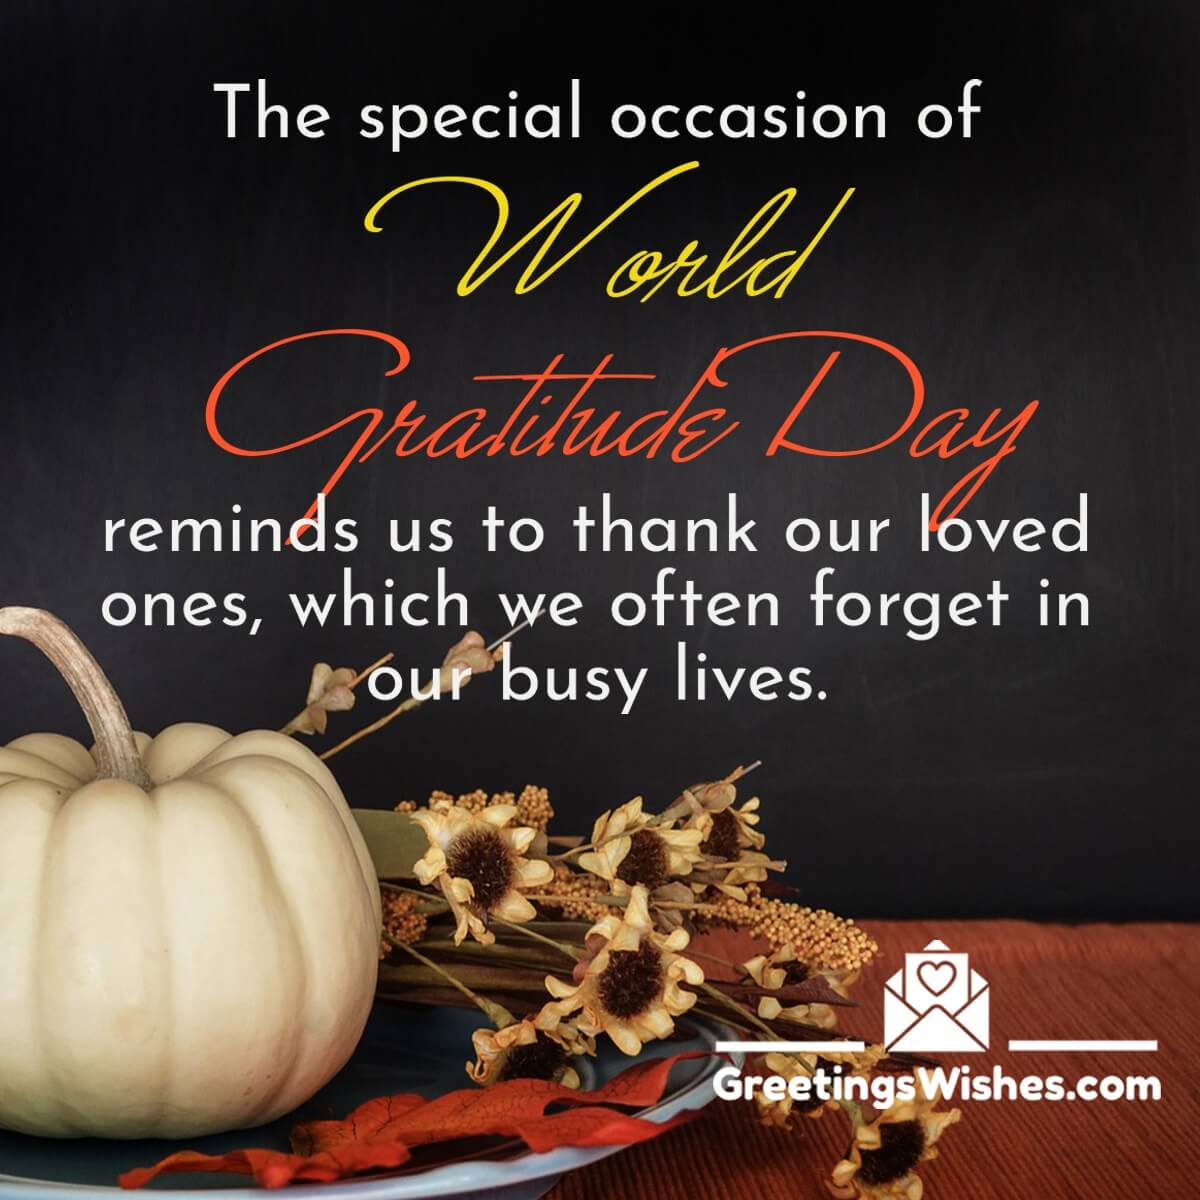 World Gratitude Day Wish For Loved Ones